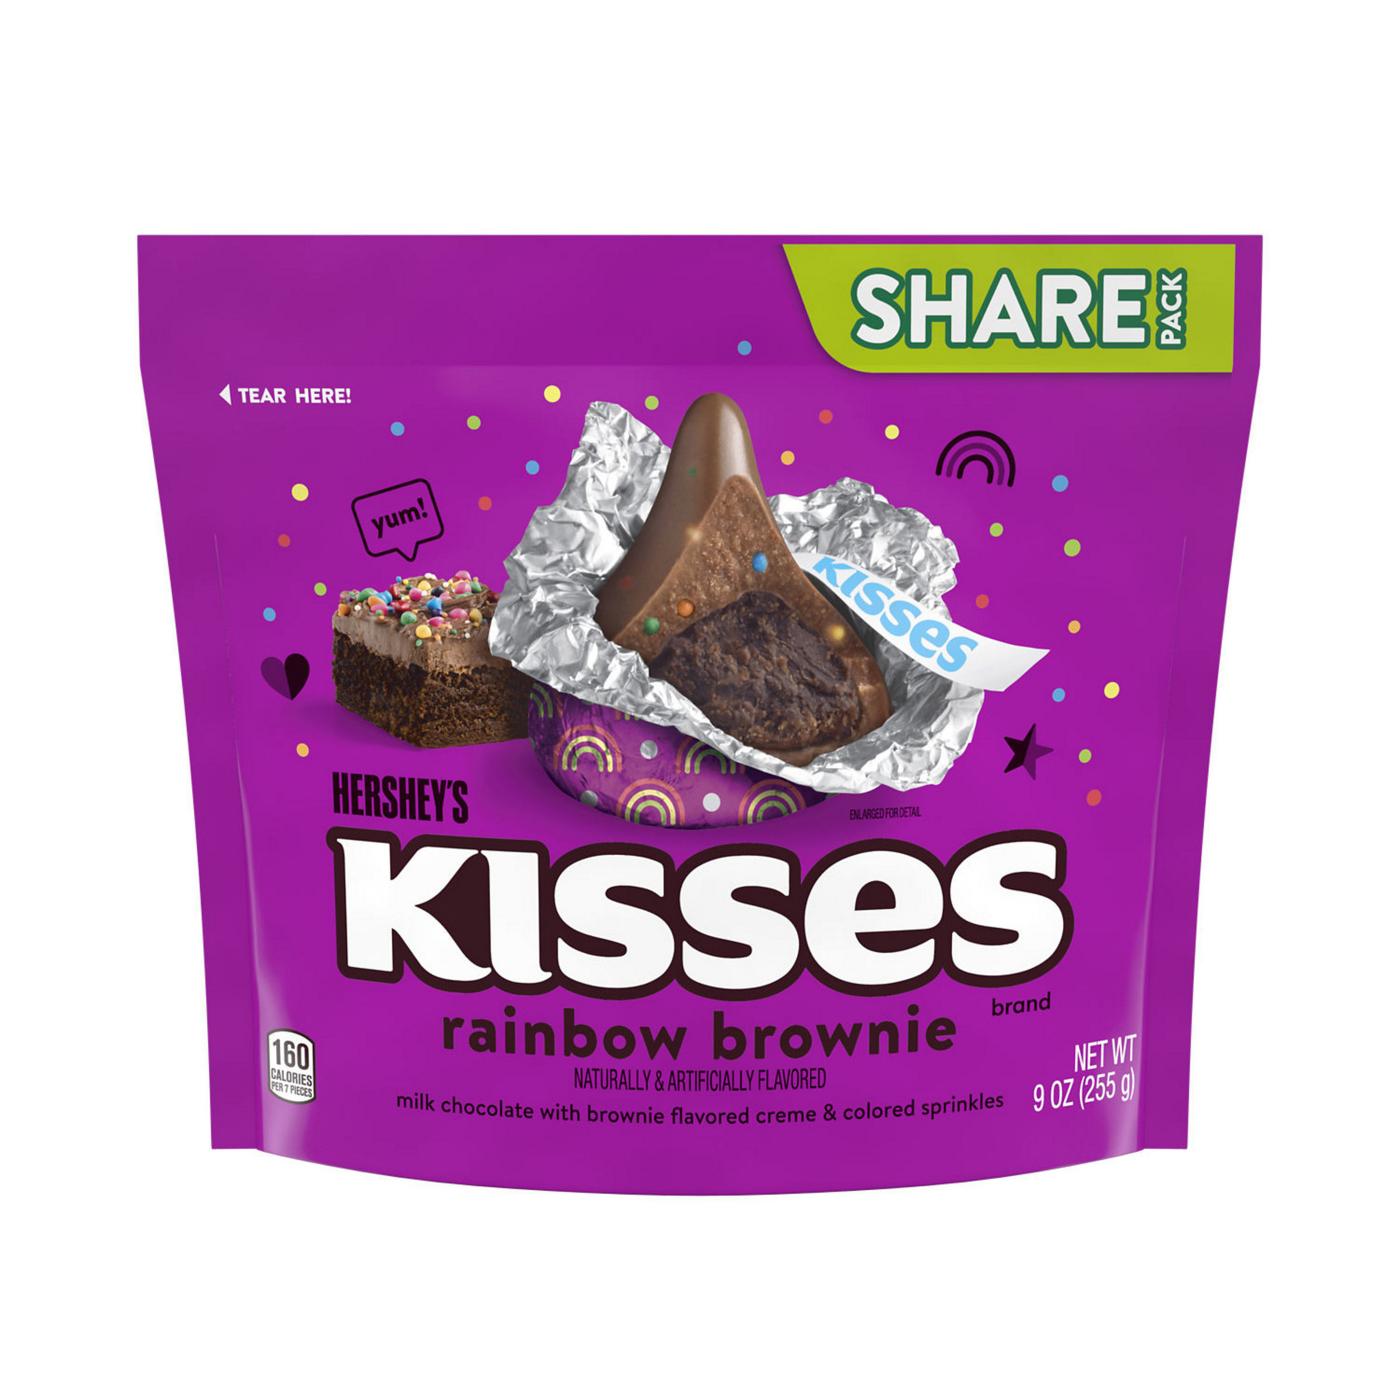 Hershey's Kisses Rainbow Brownie Candy - Share Pack; image 1 of 7